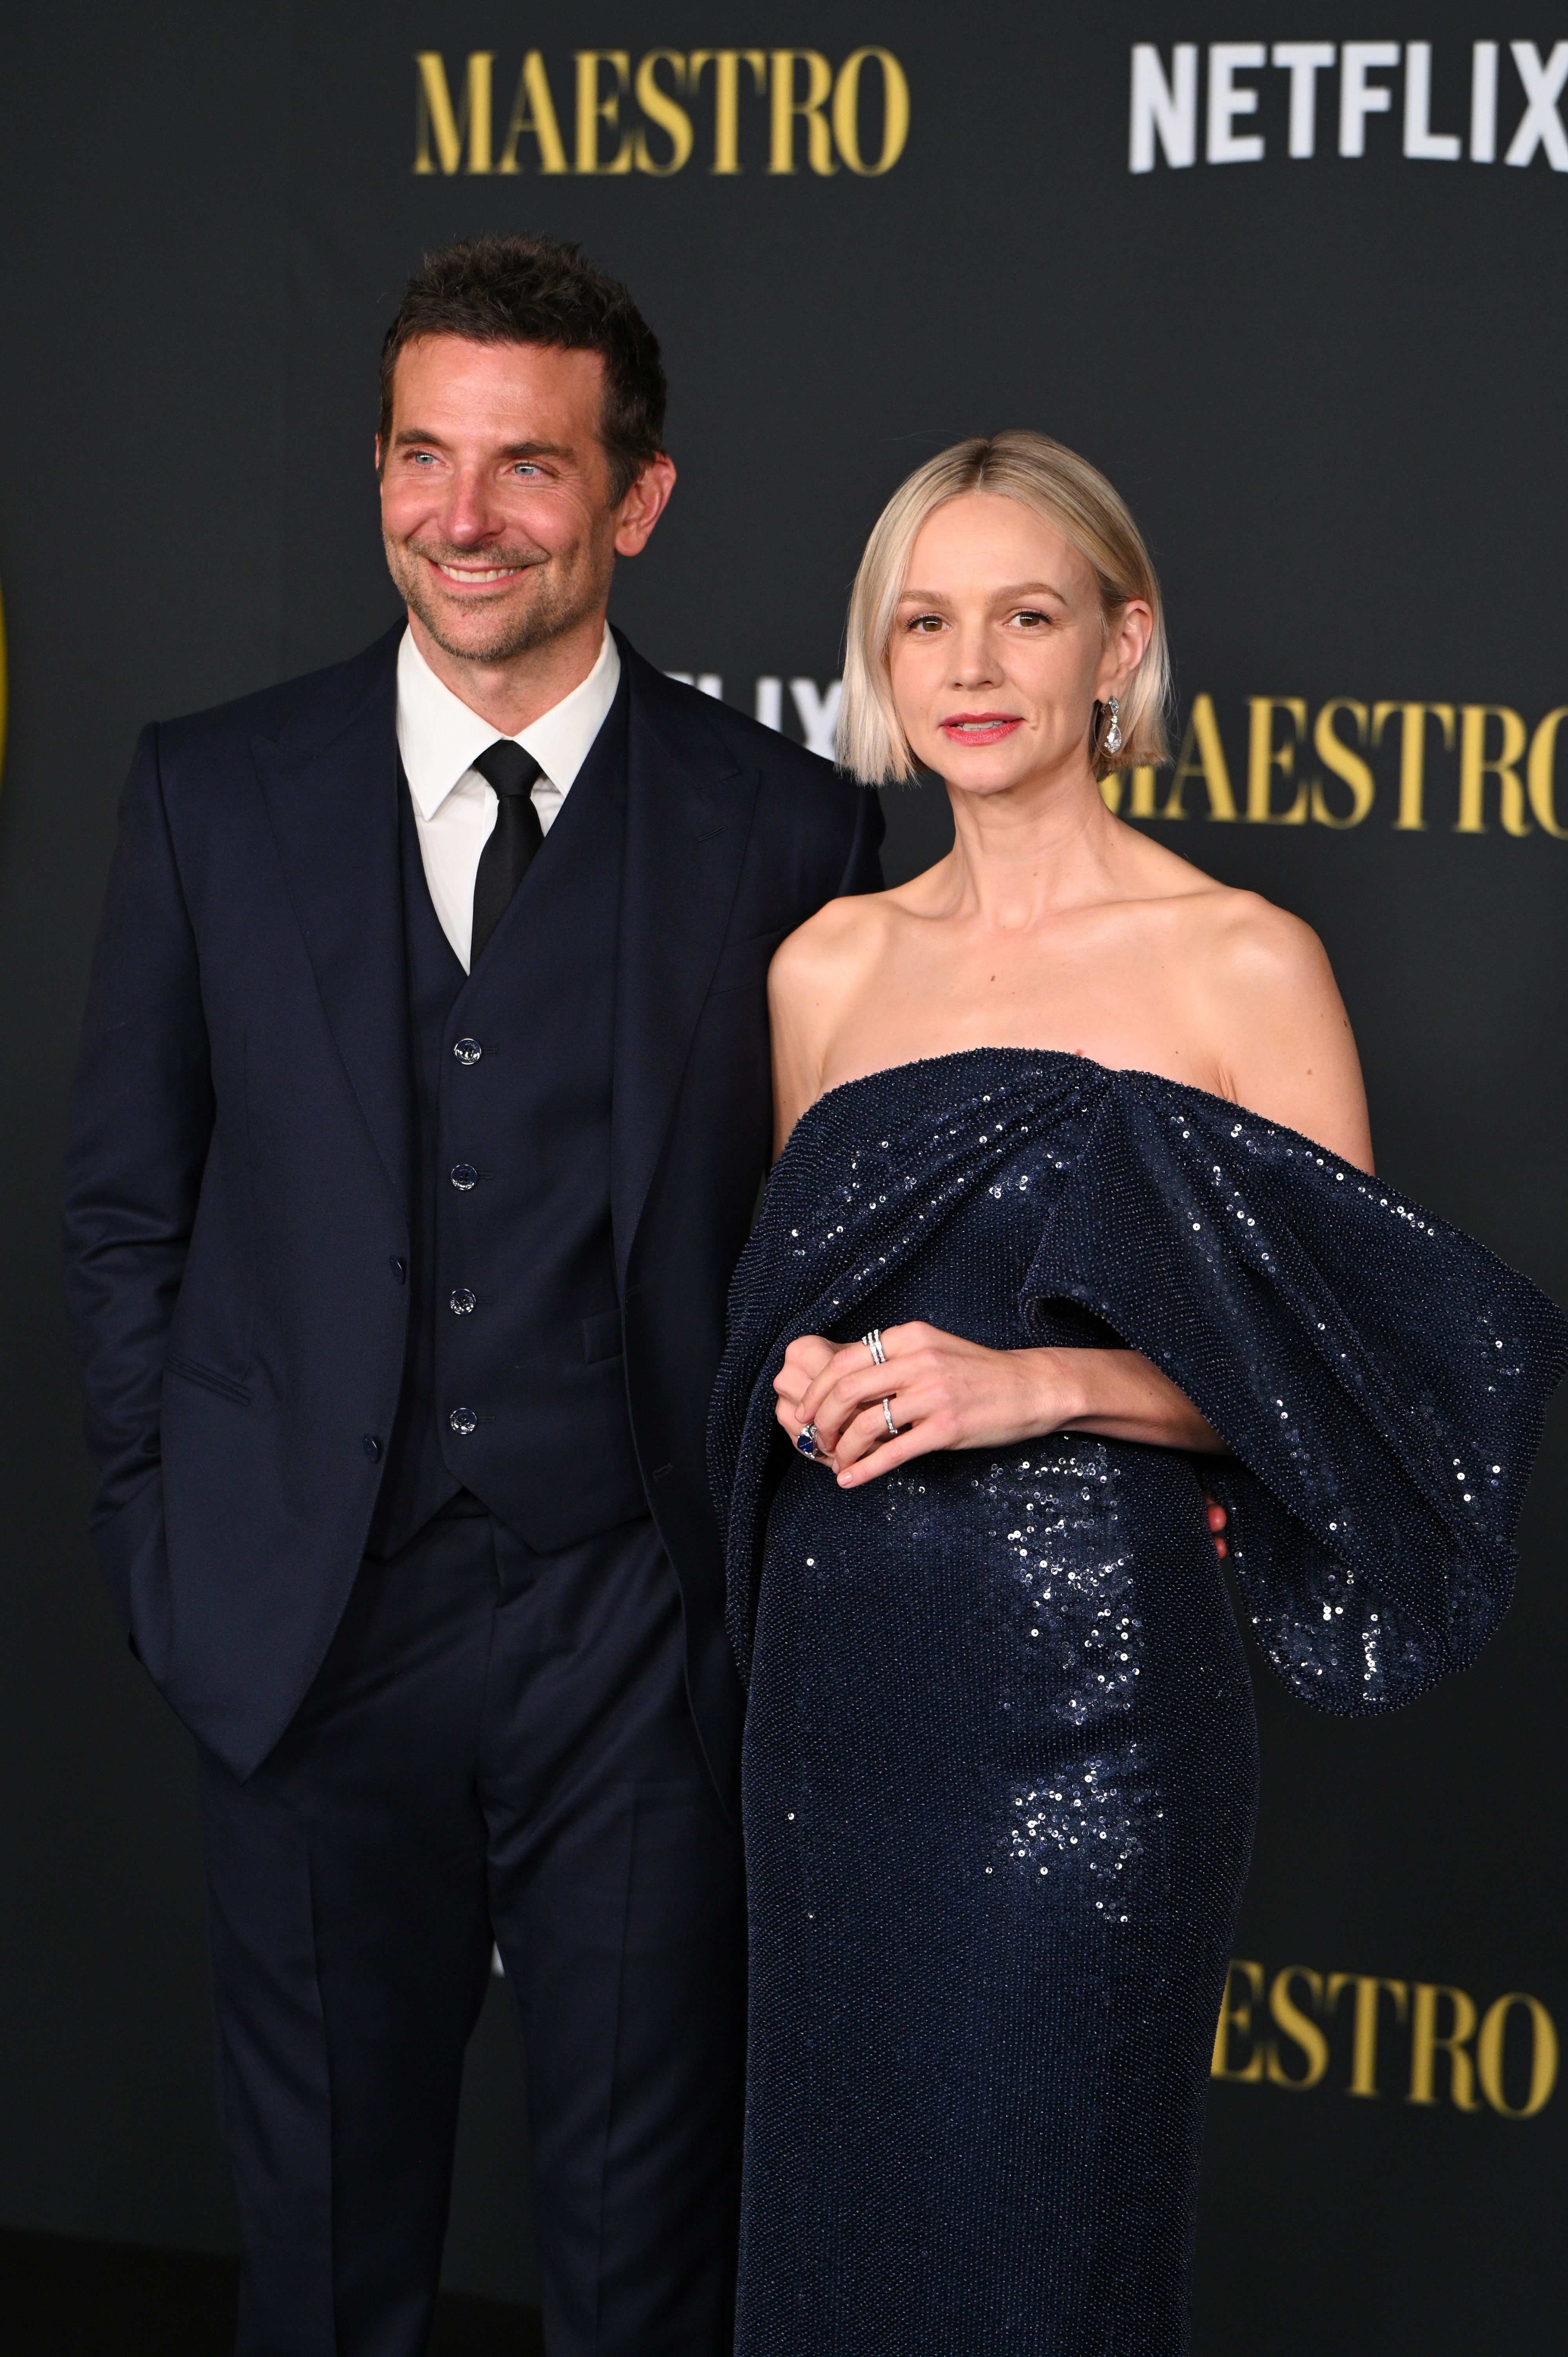 Bradley Cooper poses next to costar Carey Mulligan on the red carpet